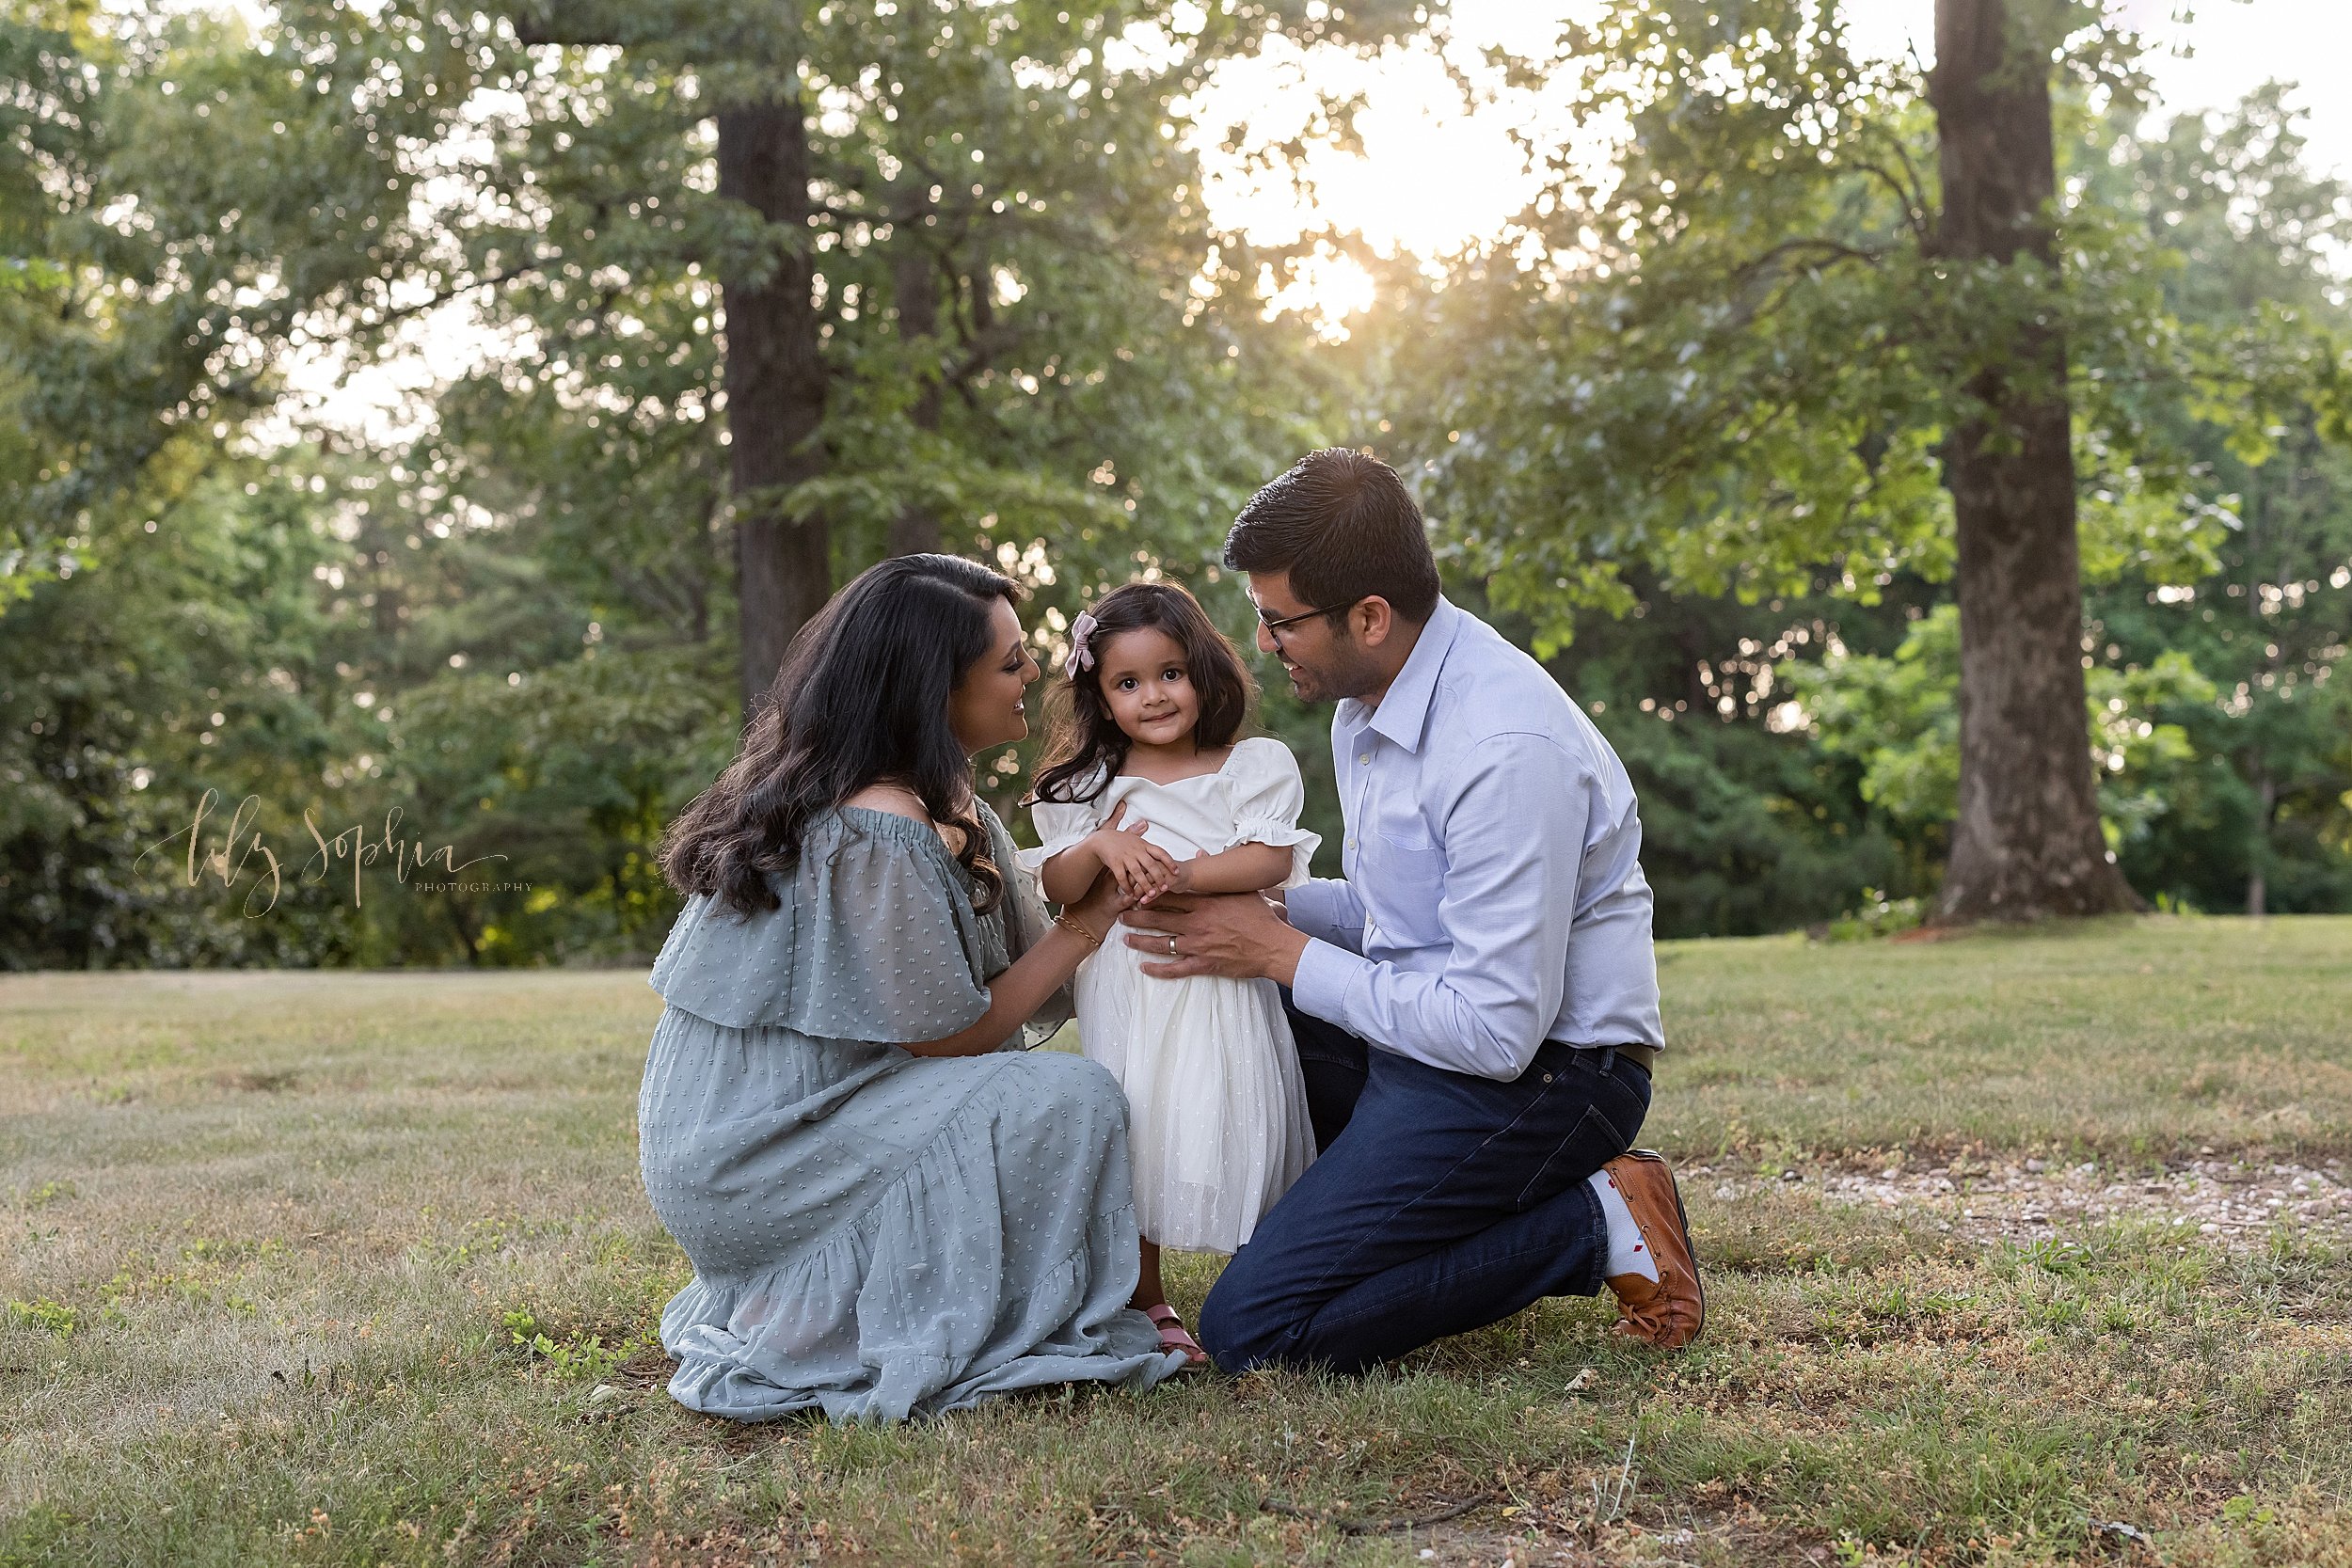  Family photo session in an Atlanta park of an Indian mother and father squatting with their daughter between them while the sun sets behind them. 